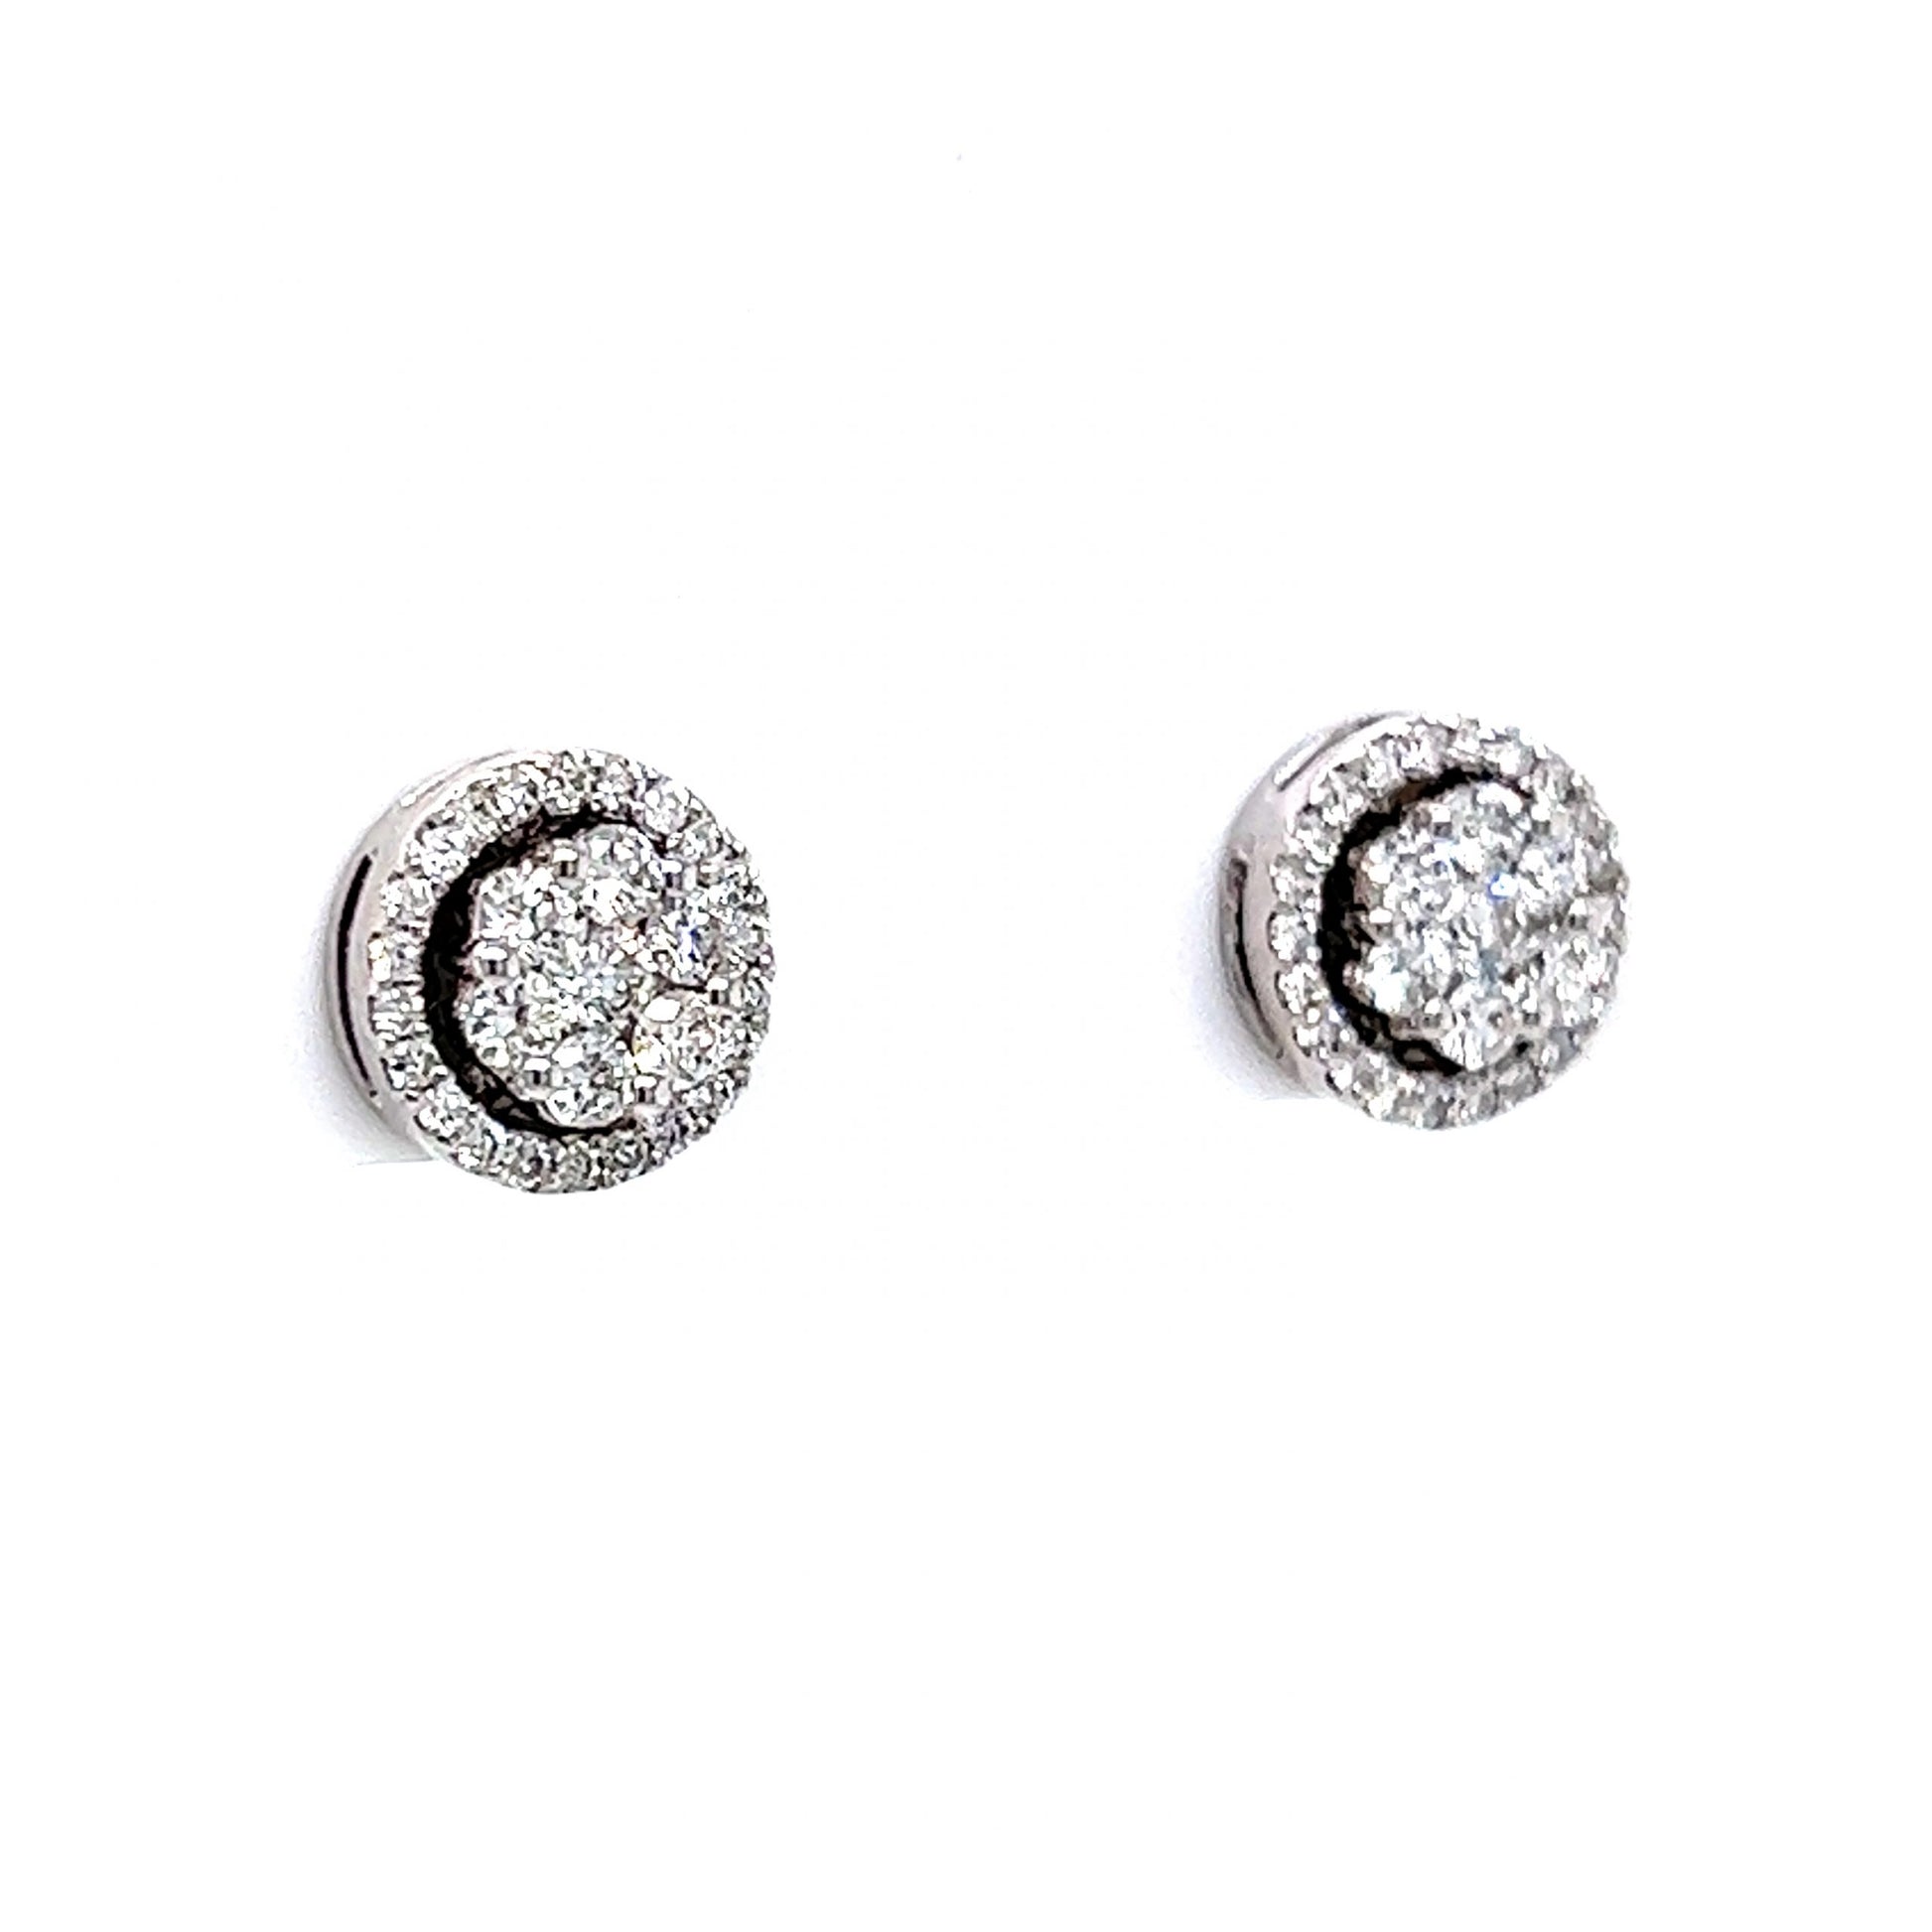 Round Cluster Pave Diamond Stud Earrings in 14k White Gold